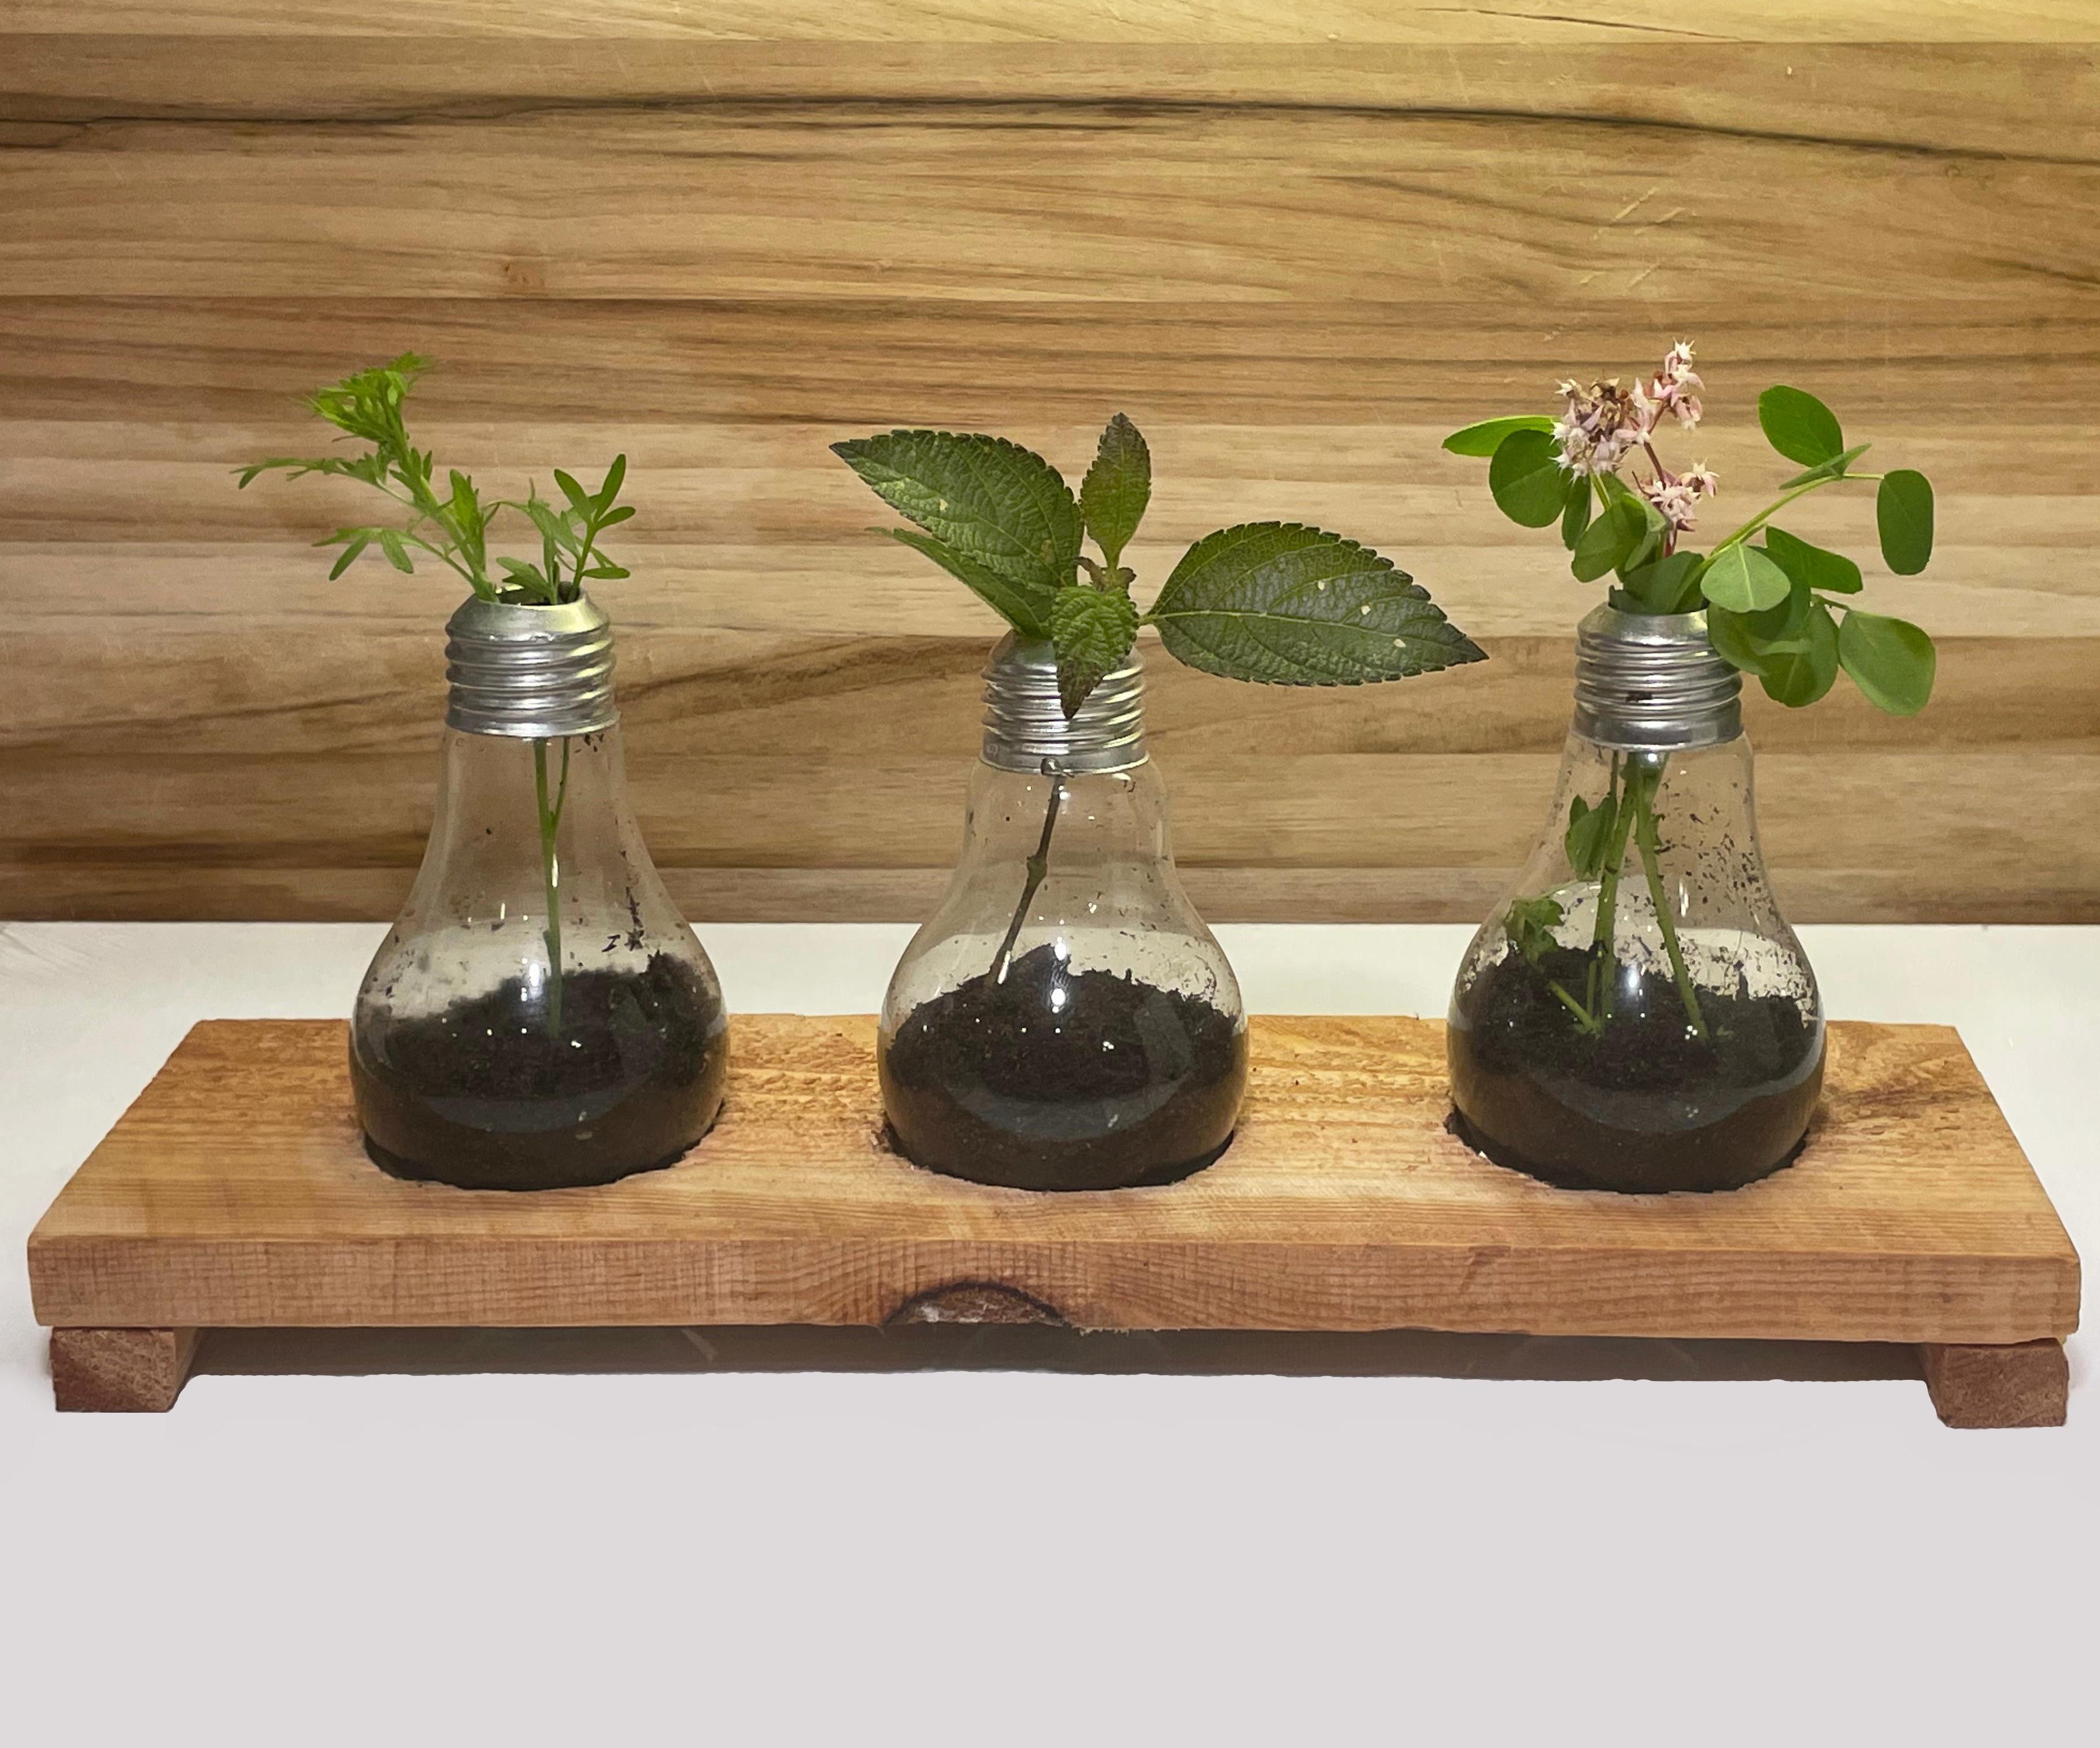 Eco-Friendly Lightbulb Planter: From Filament to Foliage